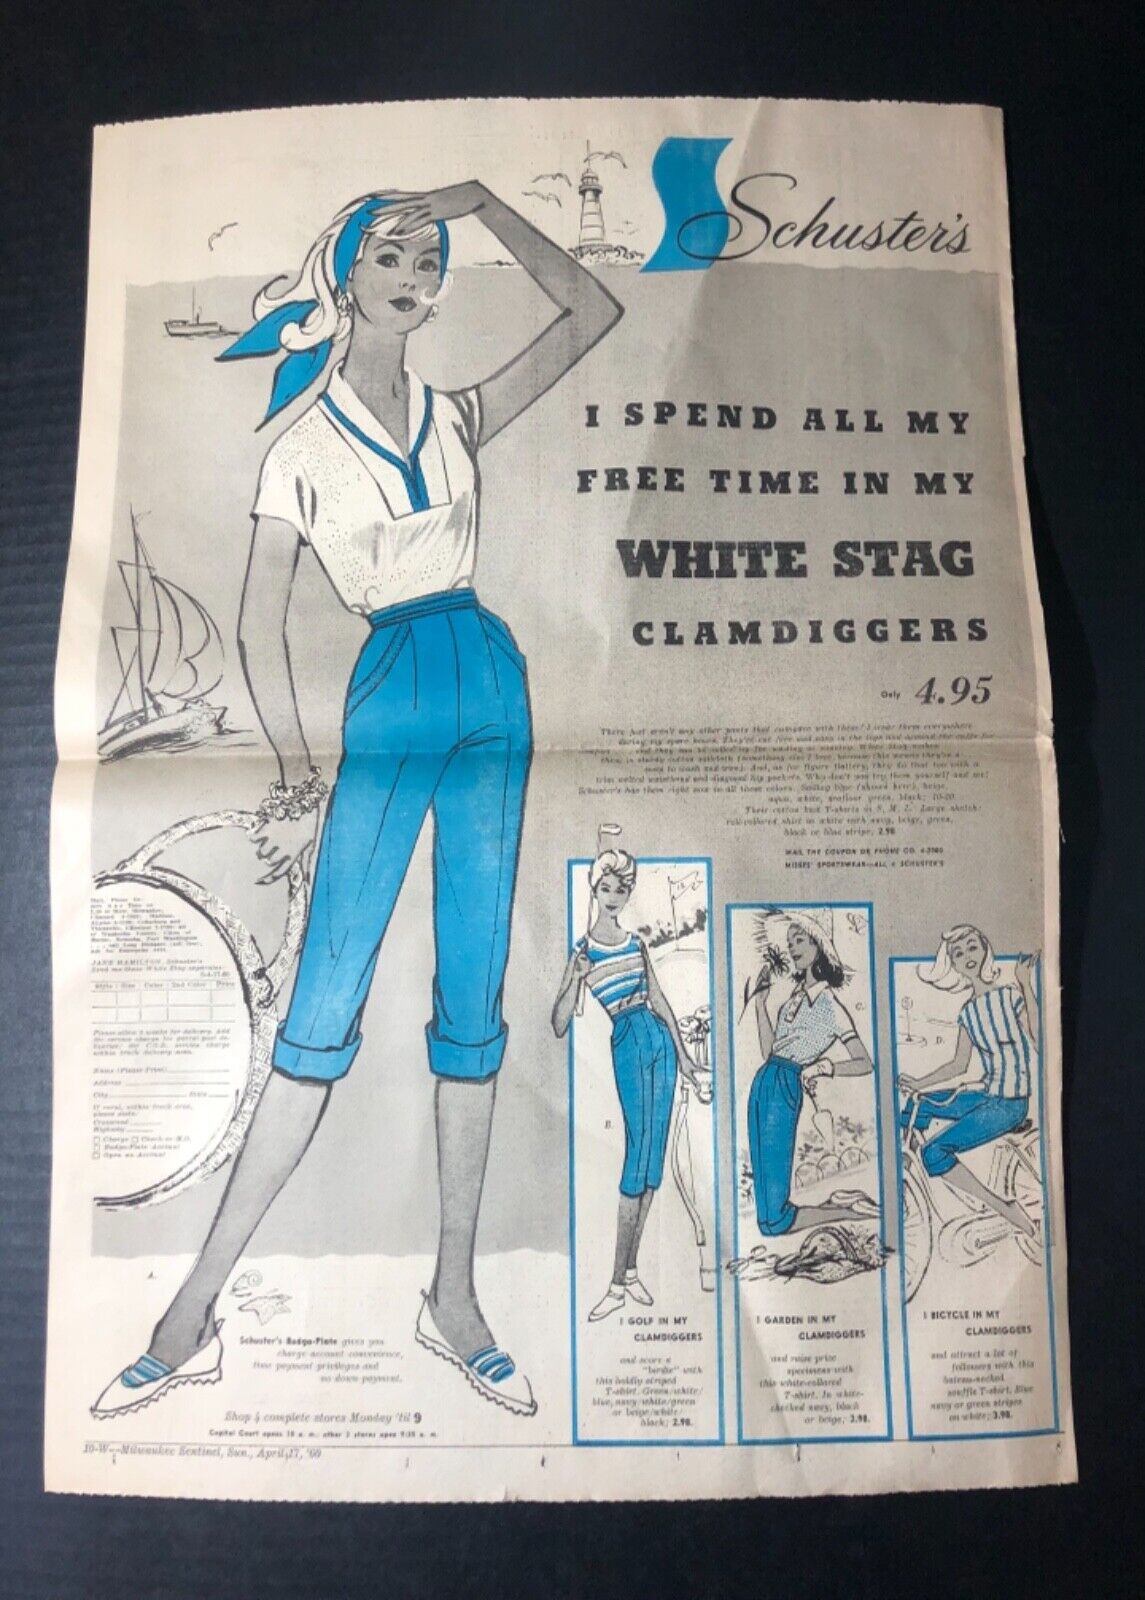 1960 Schuster’s women’s fashion/clothing clamdigger shoes  Milwaukee ad 21.5x15”